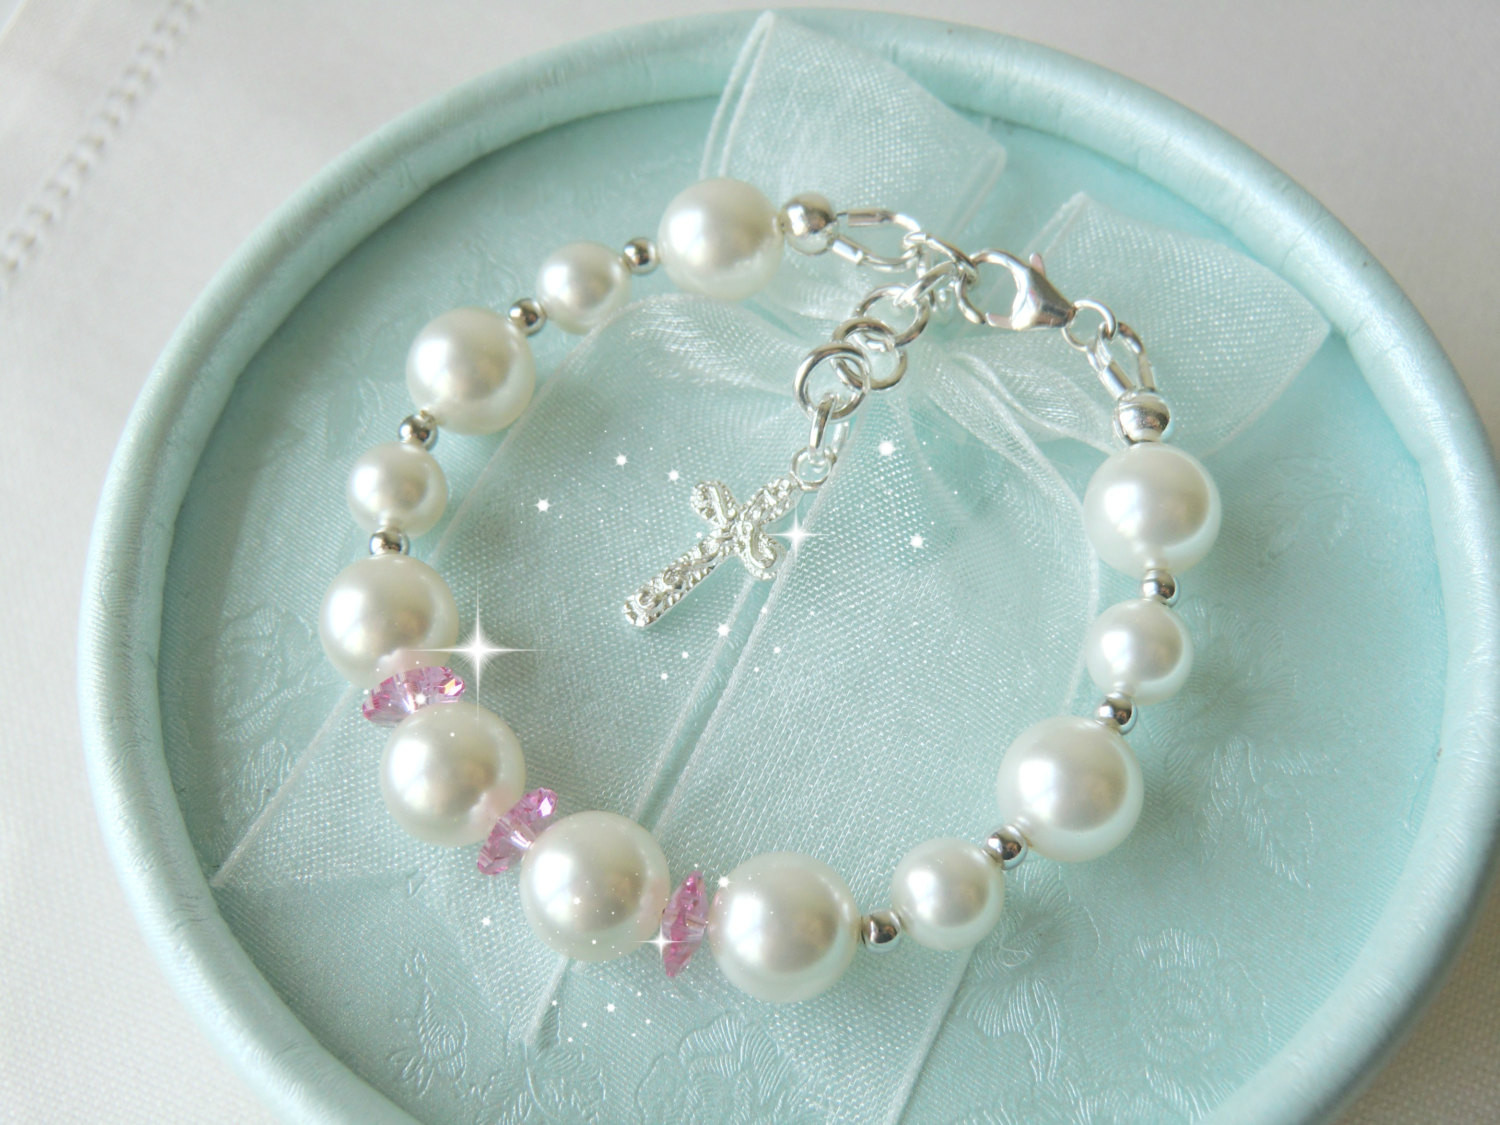 Baby Girl Baptism Gift Ideas
 The Best Christening Gift Ideas for Baby Girl Best Gift